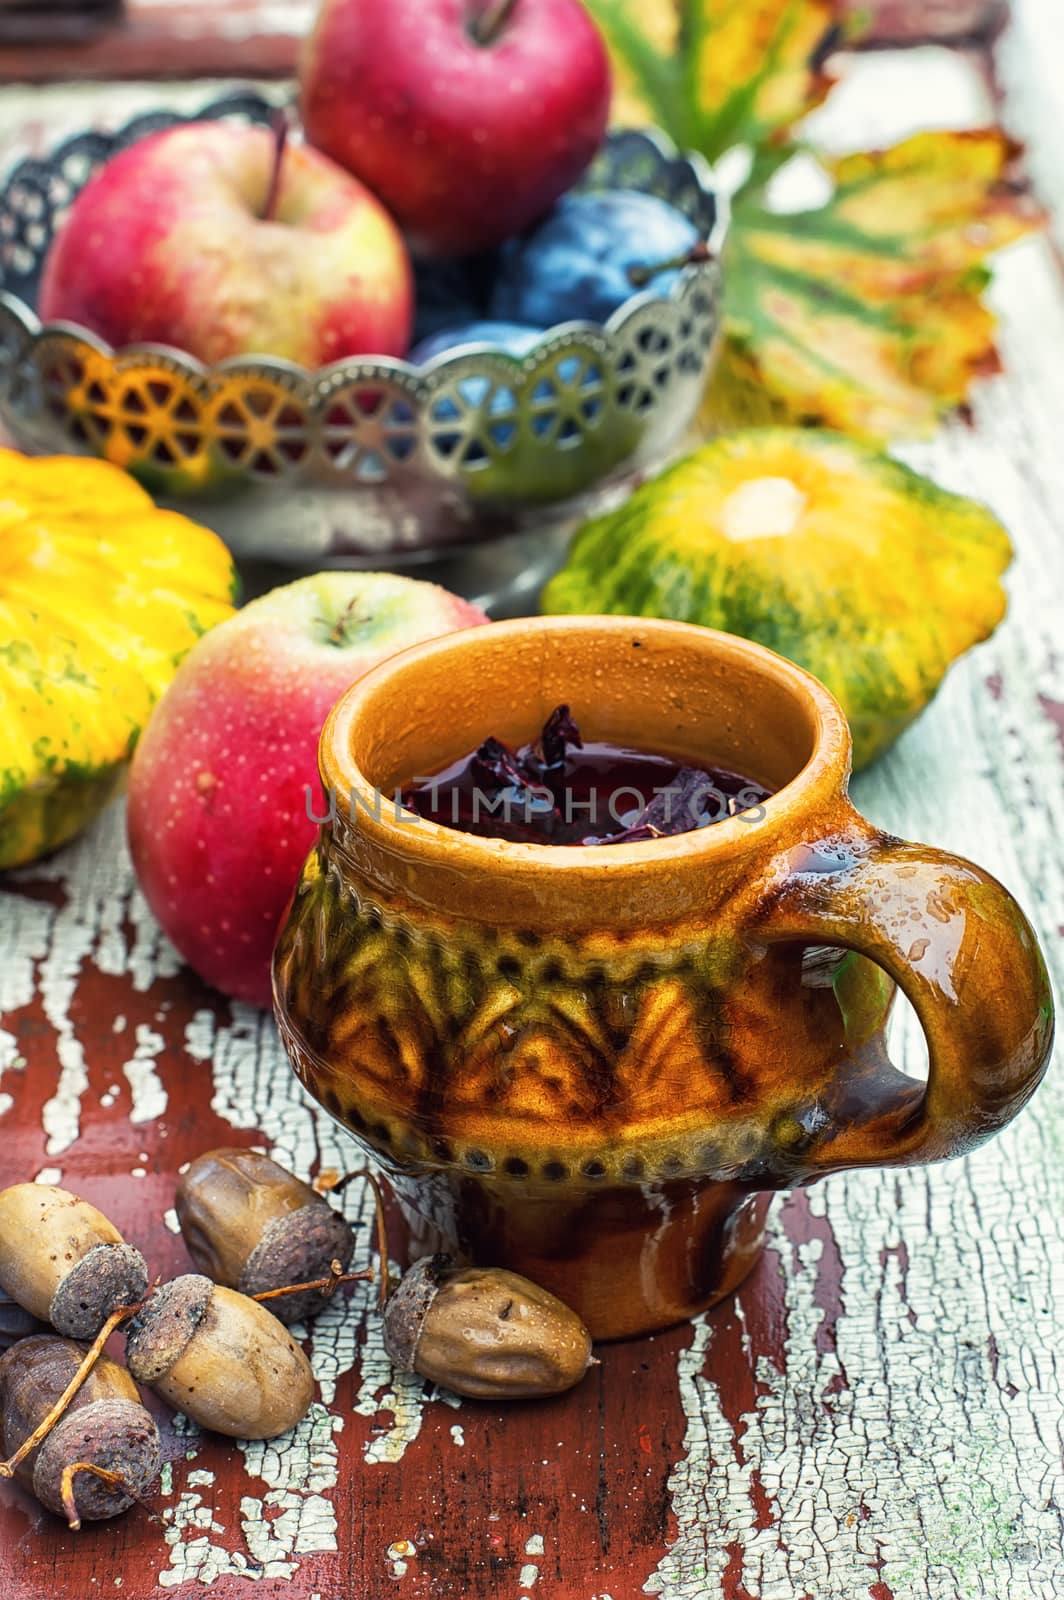 clay mug with herbal tea on  background of apples and plums in the autumn garden.Selective focus